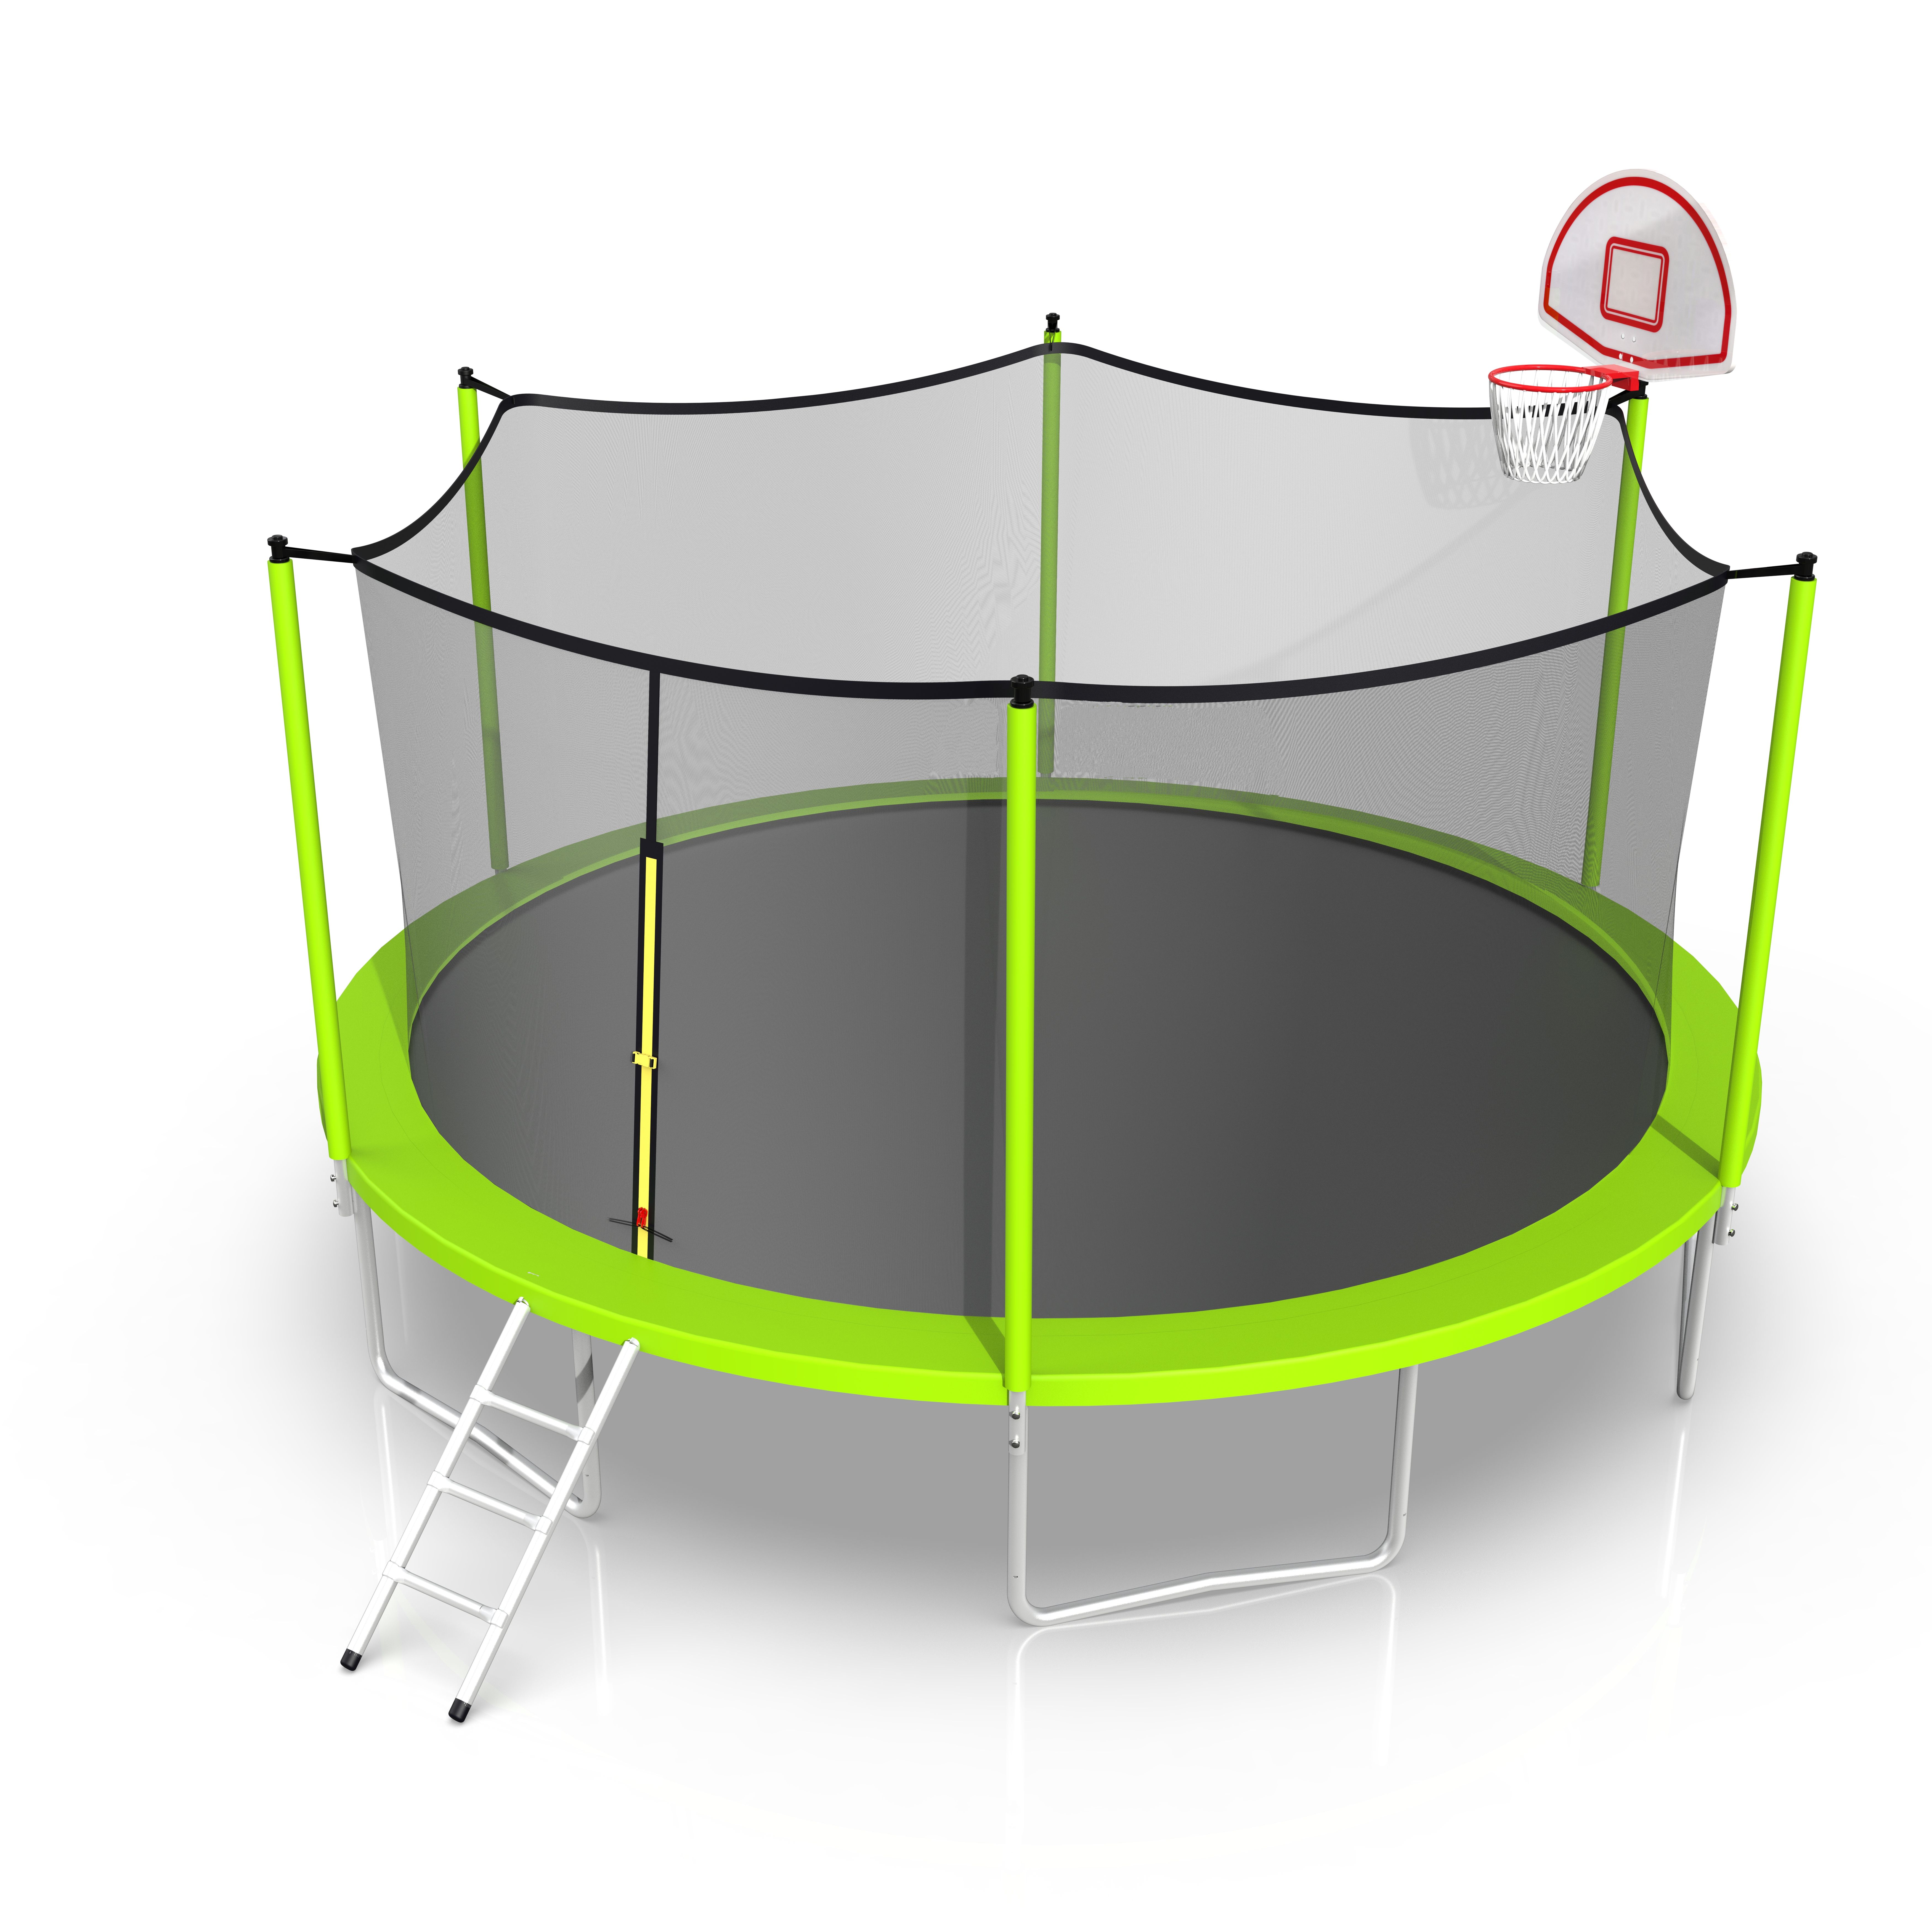 16ft Trampoline with Enclosure, New Upgraded Kids Outdoor Trampoline with Basketball Hoop and Ladder, Heavy-Duty Round Trampoline，Green-Boyel Living